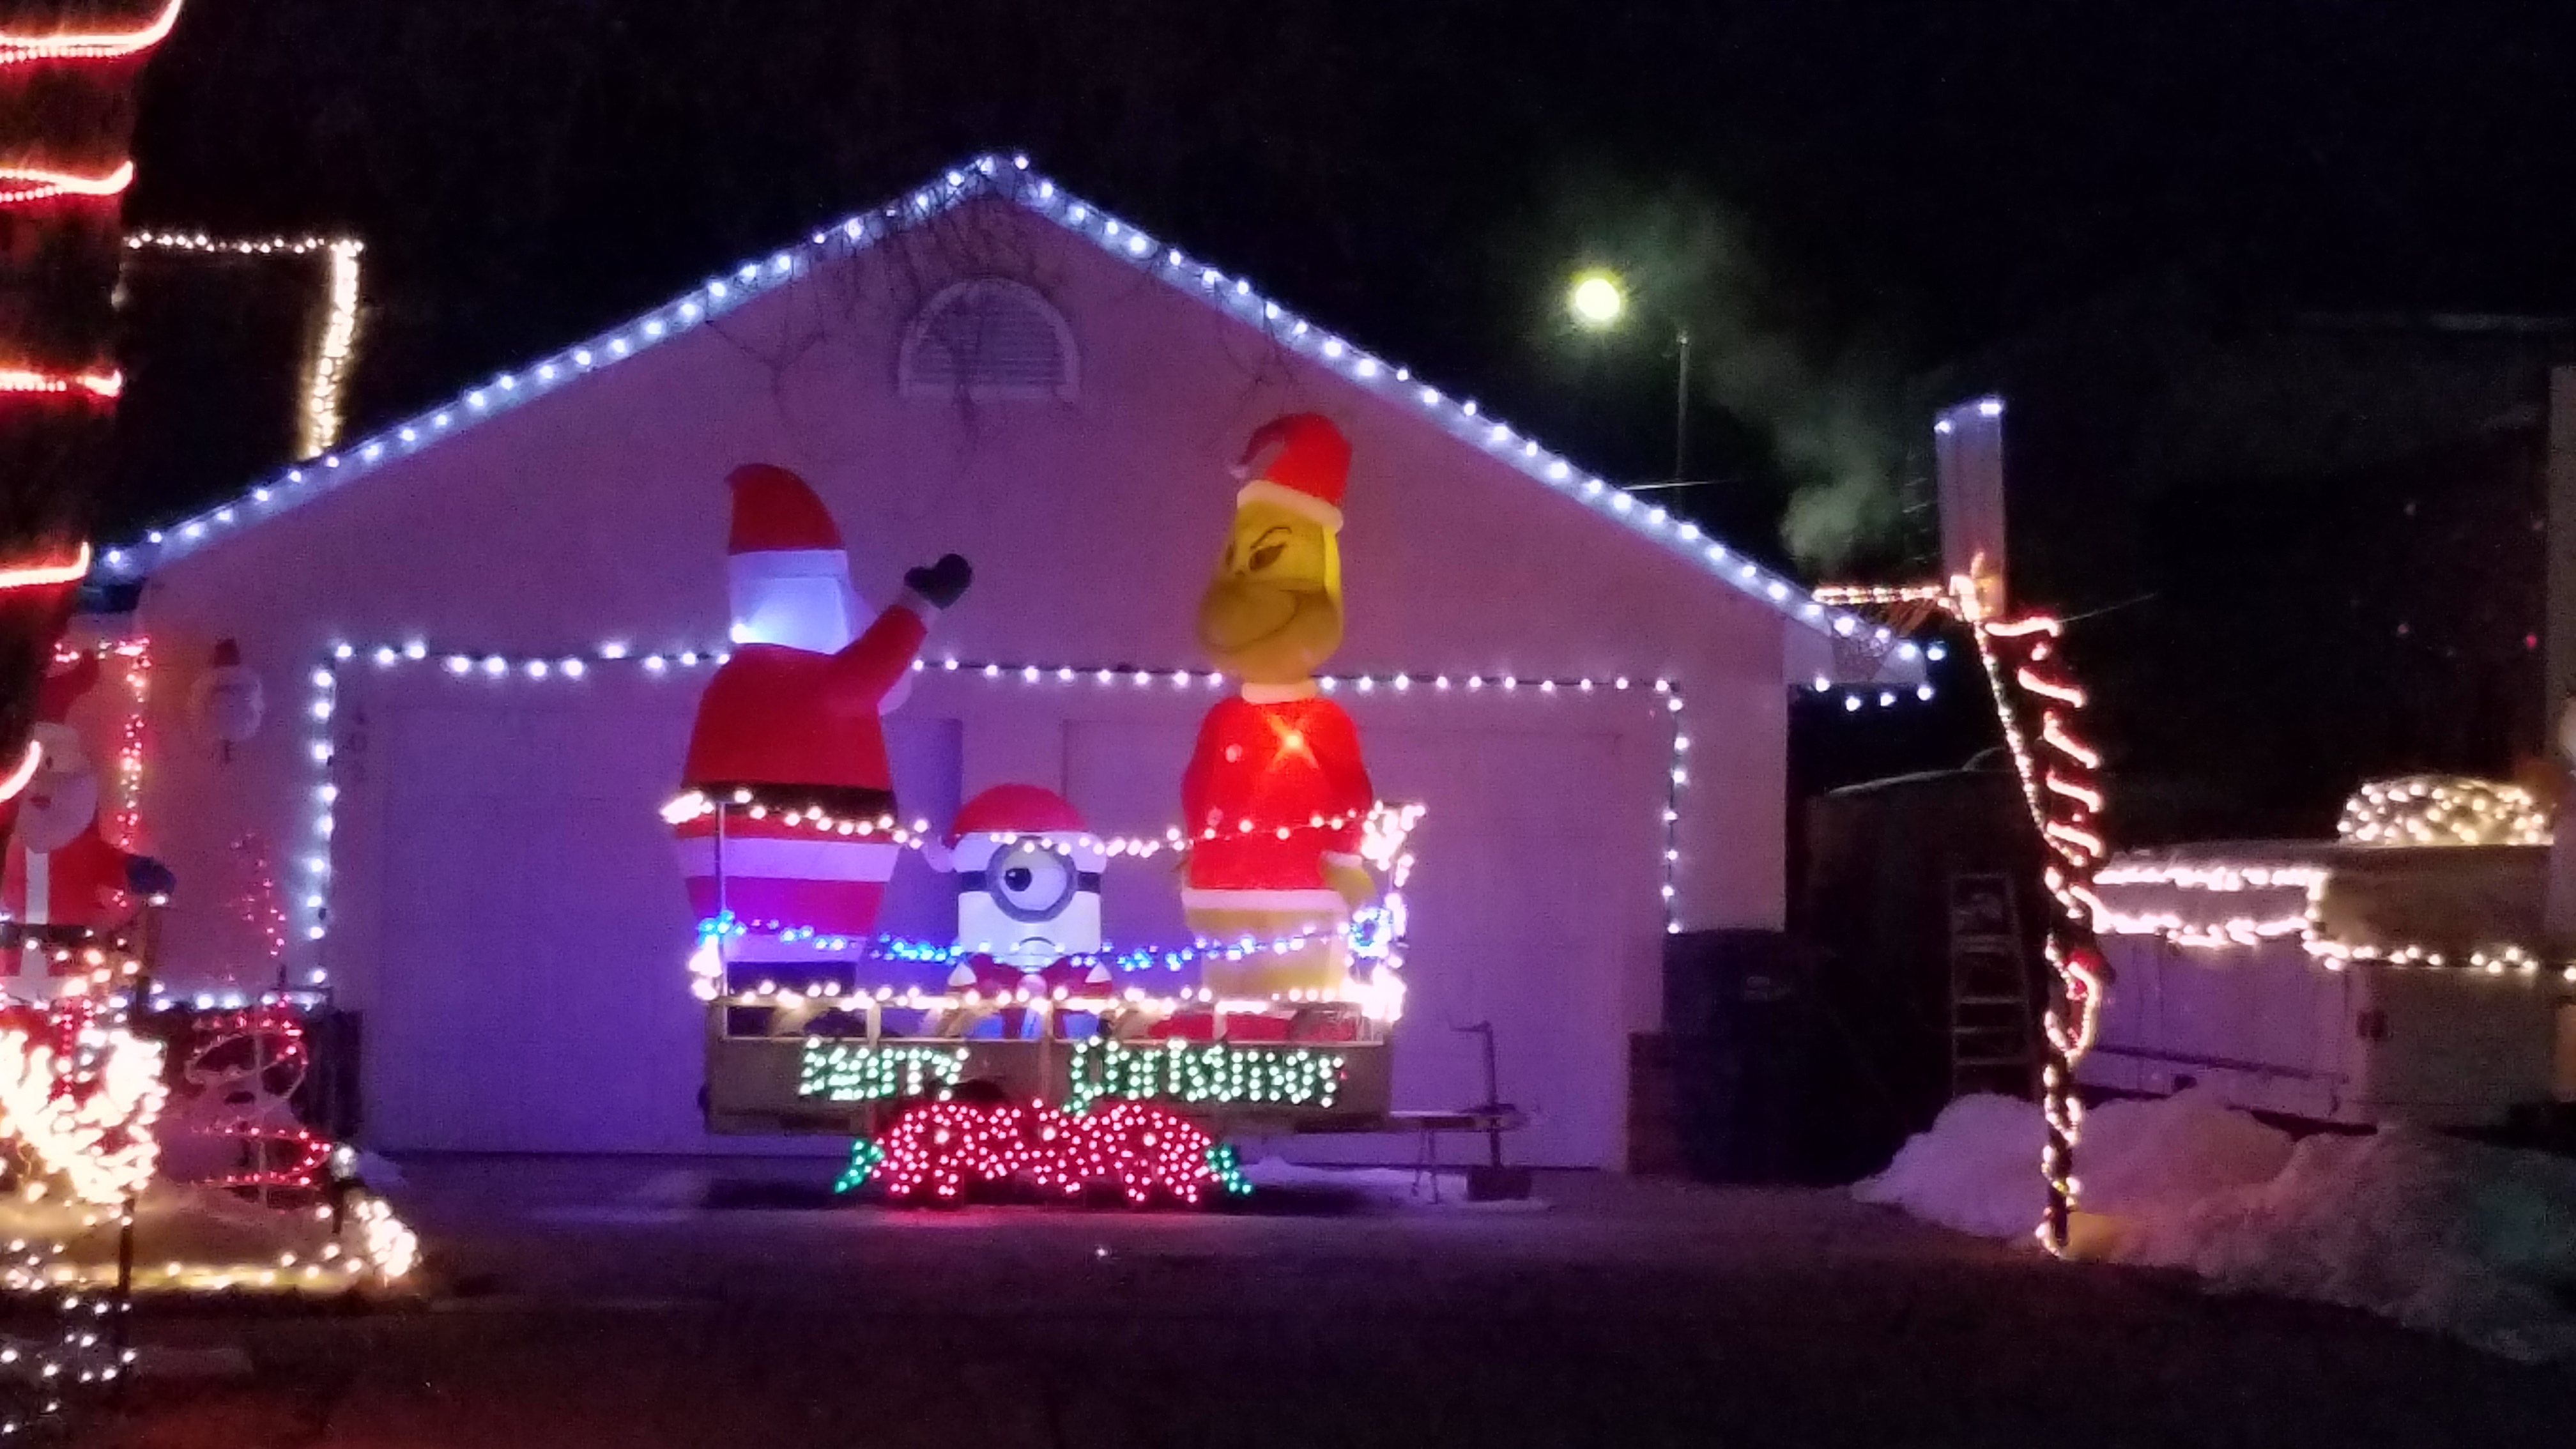 SECO NEWS Community Photography Rocky Ford Christmas Lights Liz Roberts seconews.org